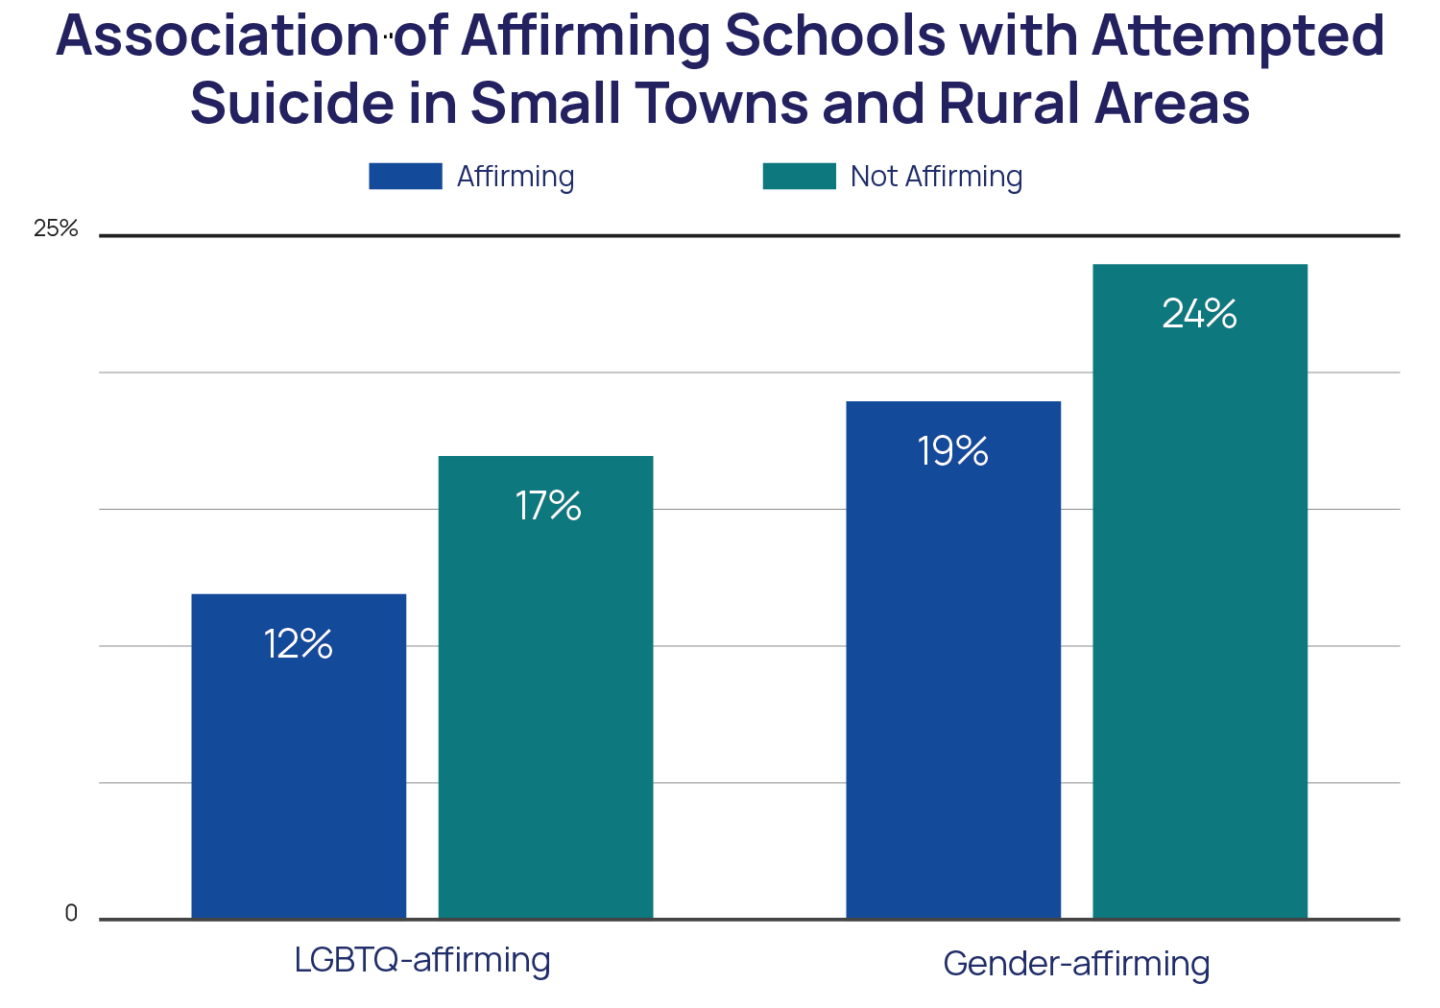 Association of Affirming Schools with Attempted Suicide in Small Towns and Rural Areas bar chart